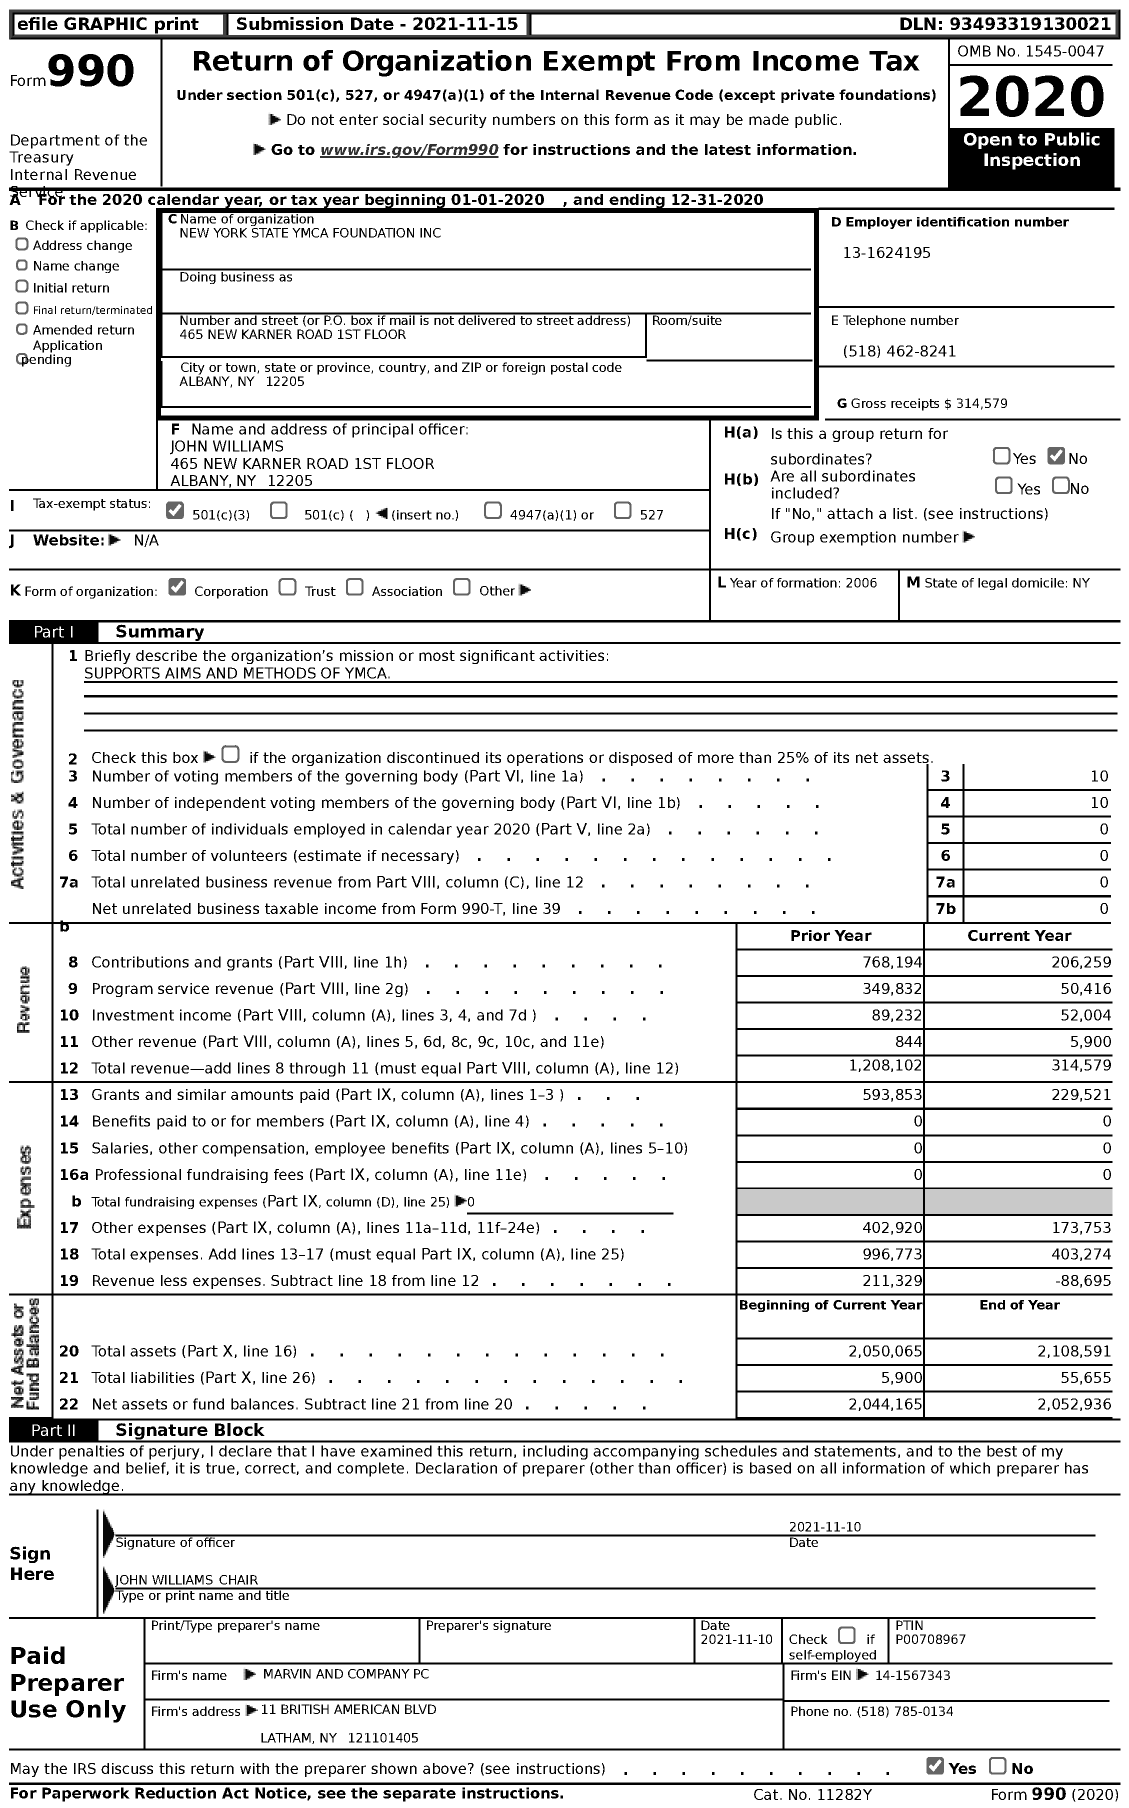 Image of first page of 2020 Form 990 for New York State Ymca Foundation